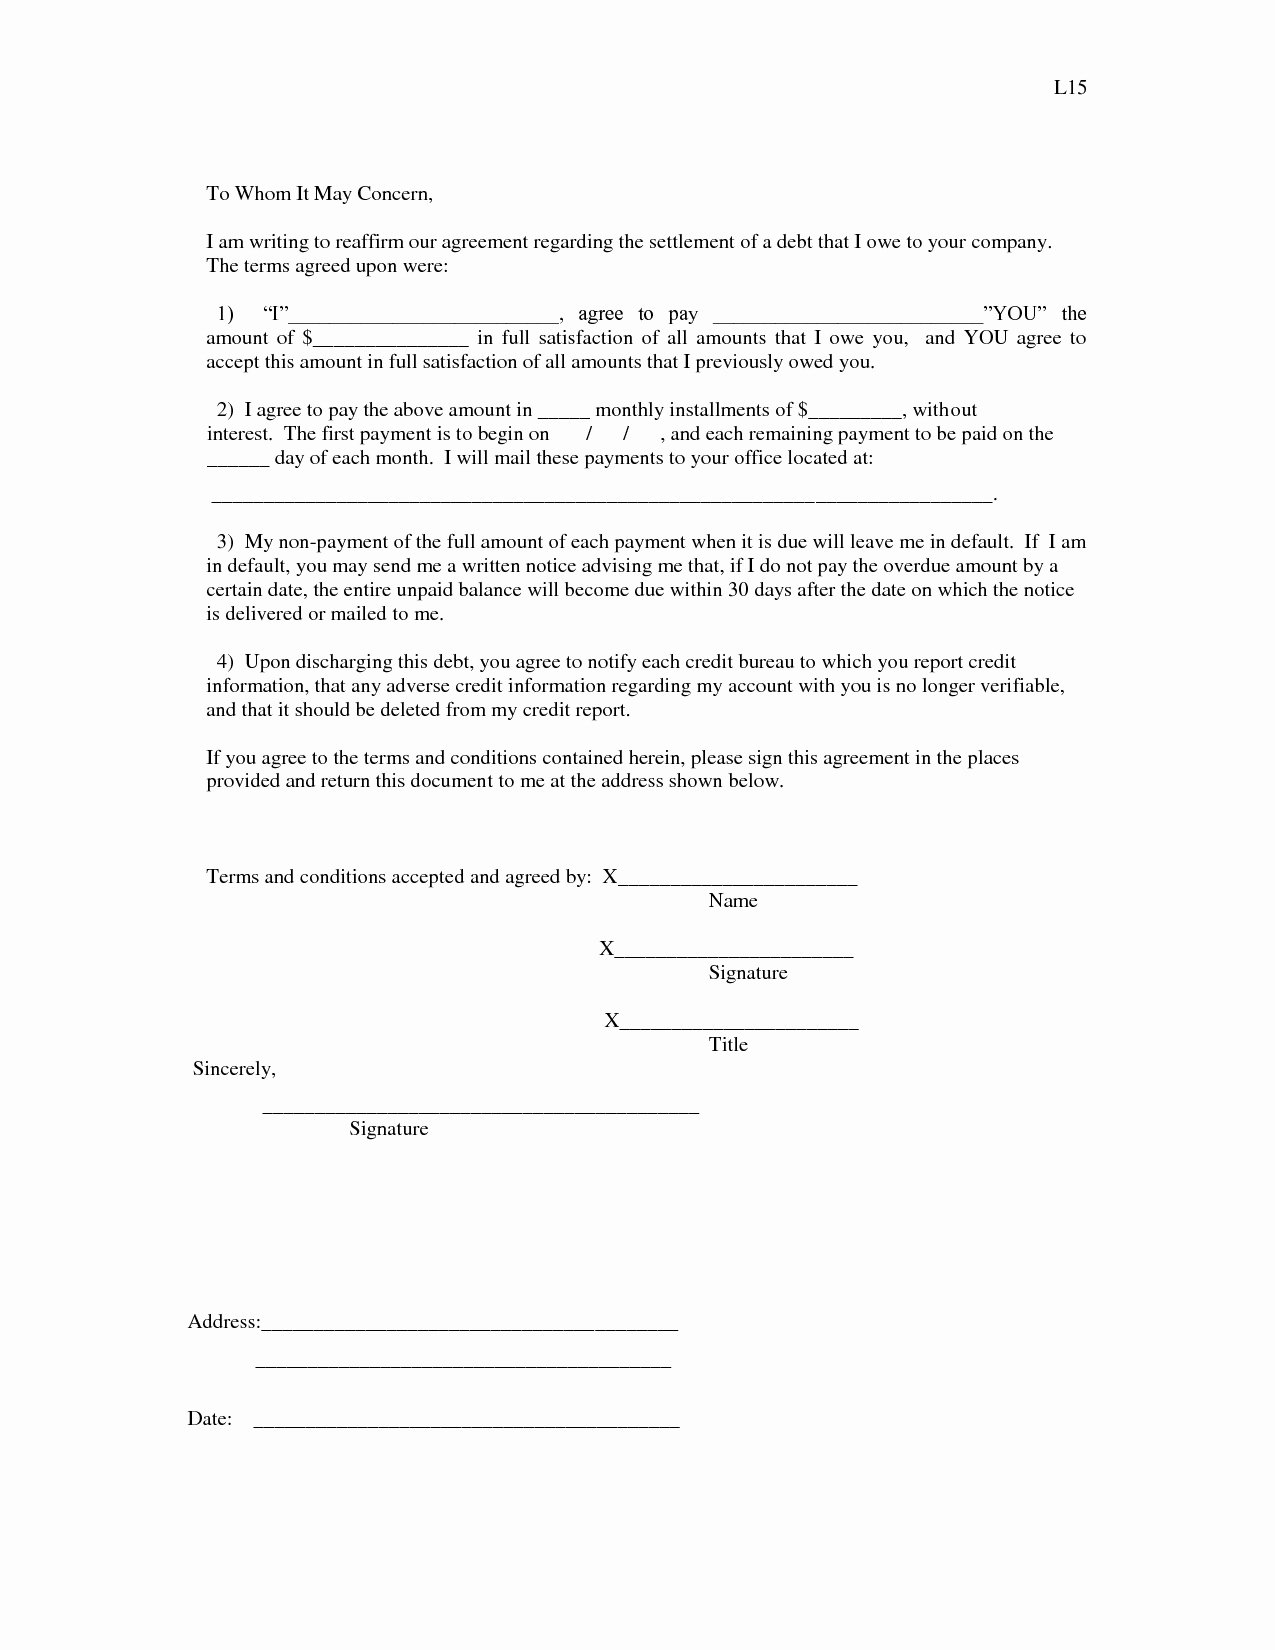 I Owe You Template Elegant Change Ownership Letter to Tenants Template Examples